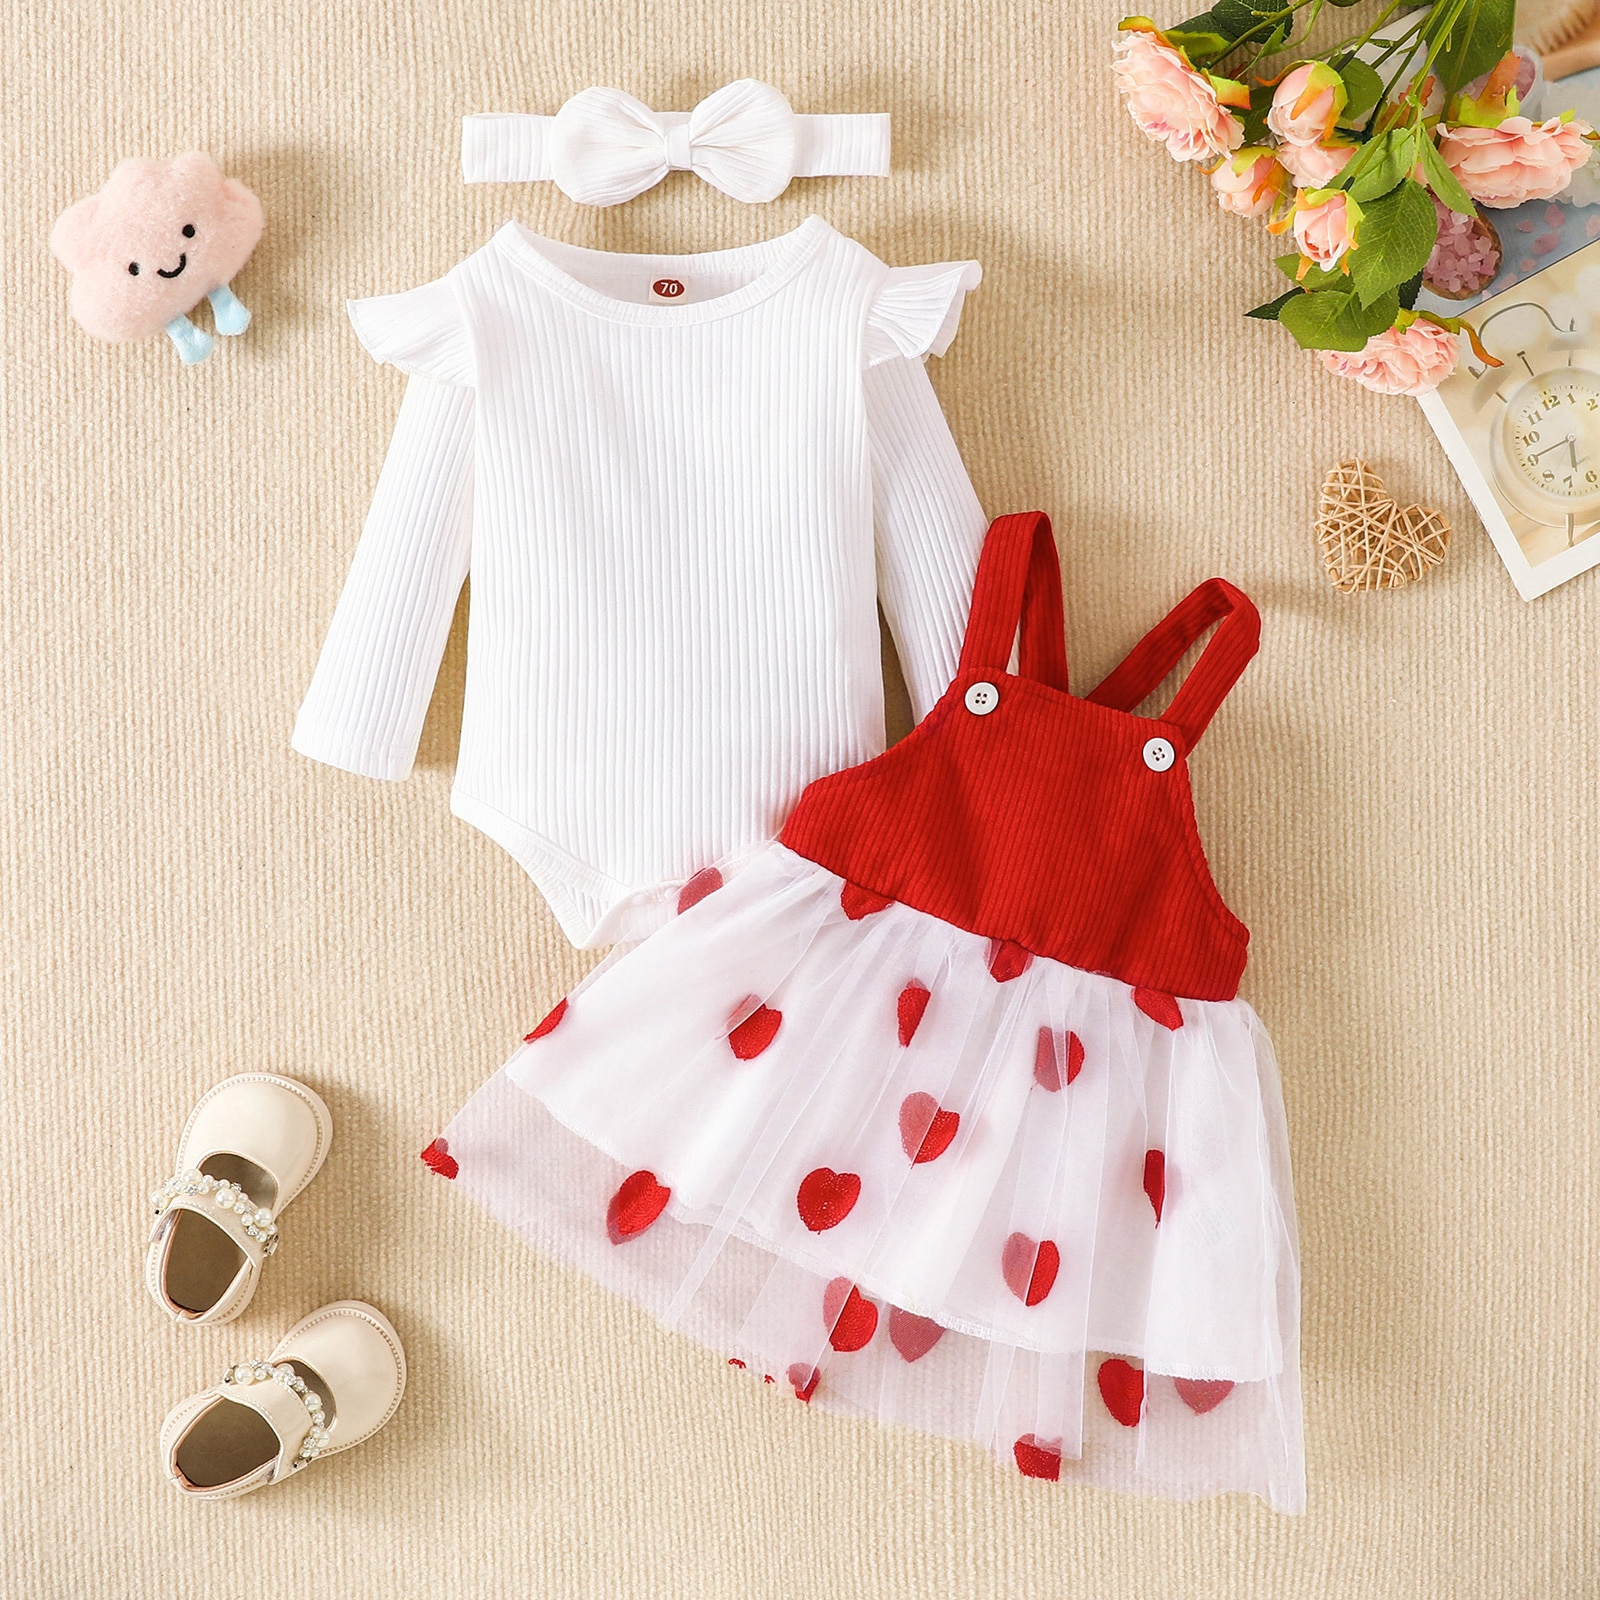 Citgeett-Spring-Valentine-s-Day-Infant-Baby-Girls-Jumpsuits-Set-Long-Sleeves-Romper-and-Heart-Print-1